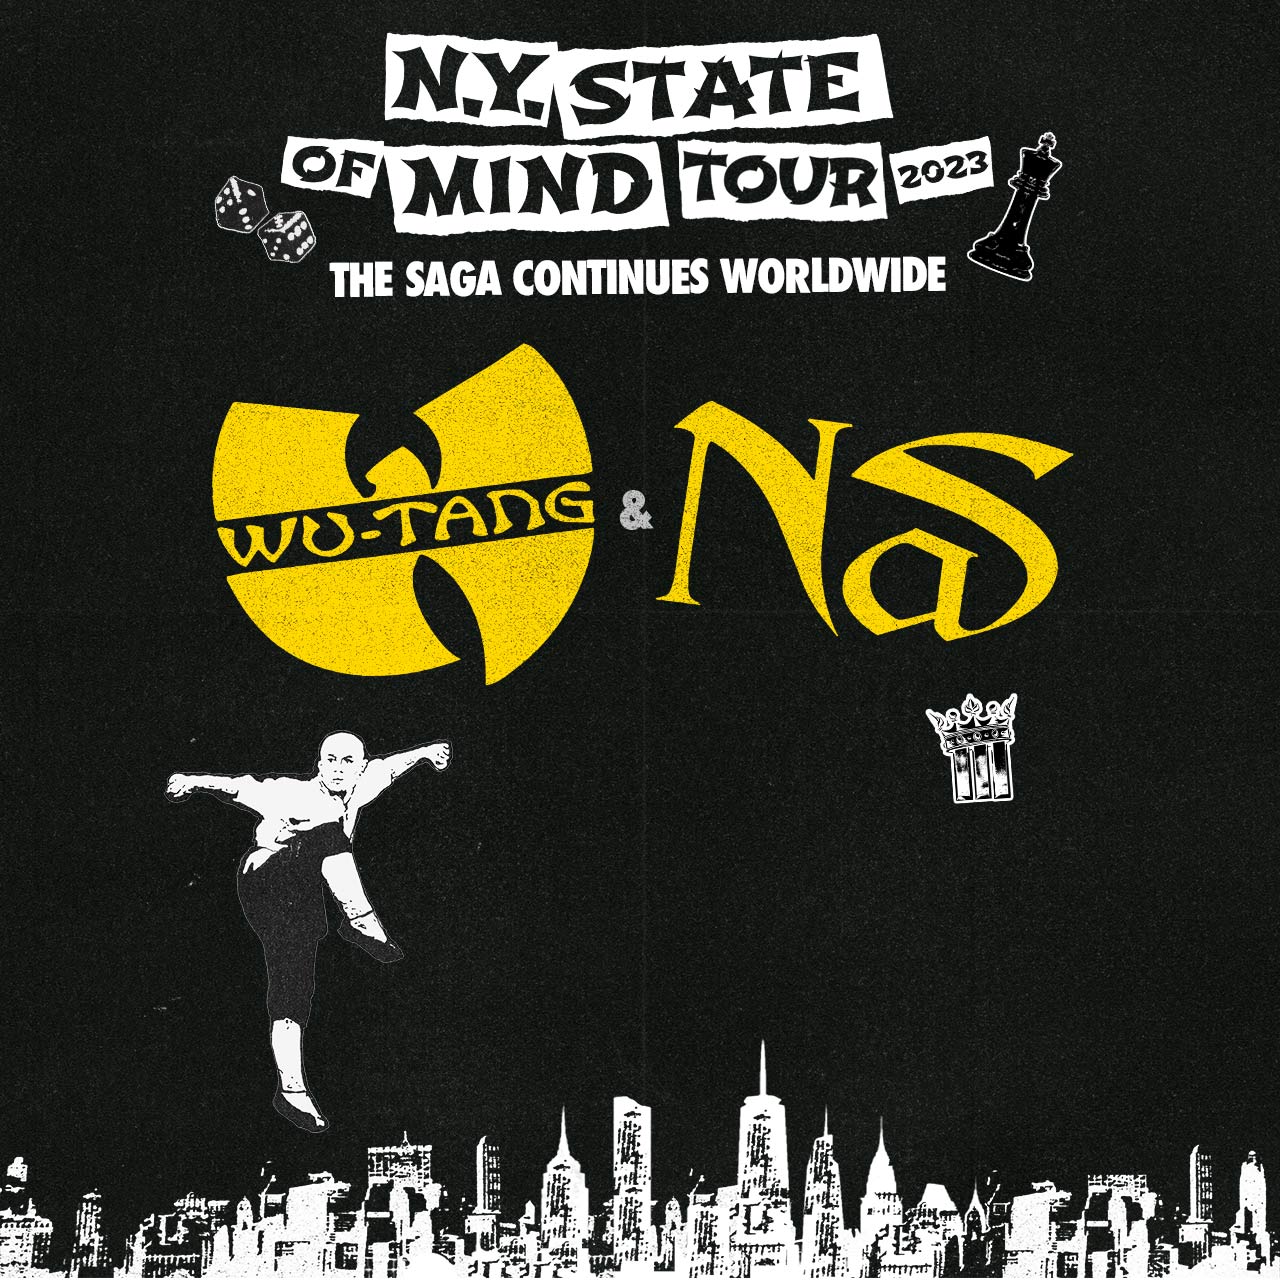 NY State of Mind Tour 2023